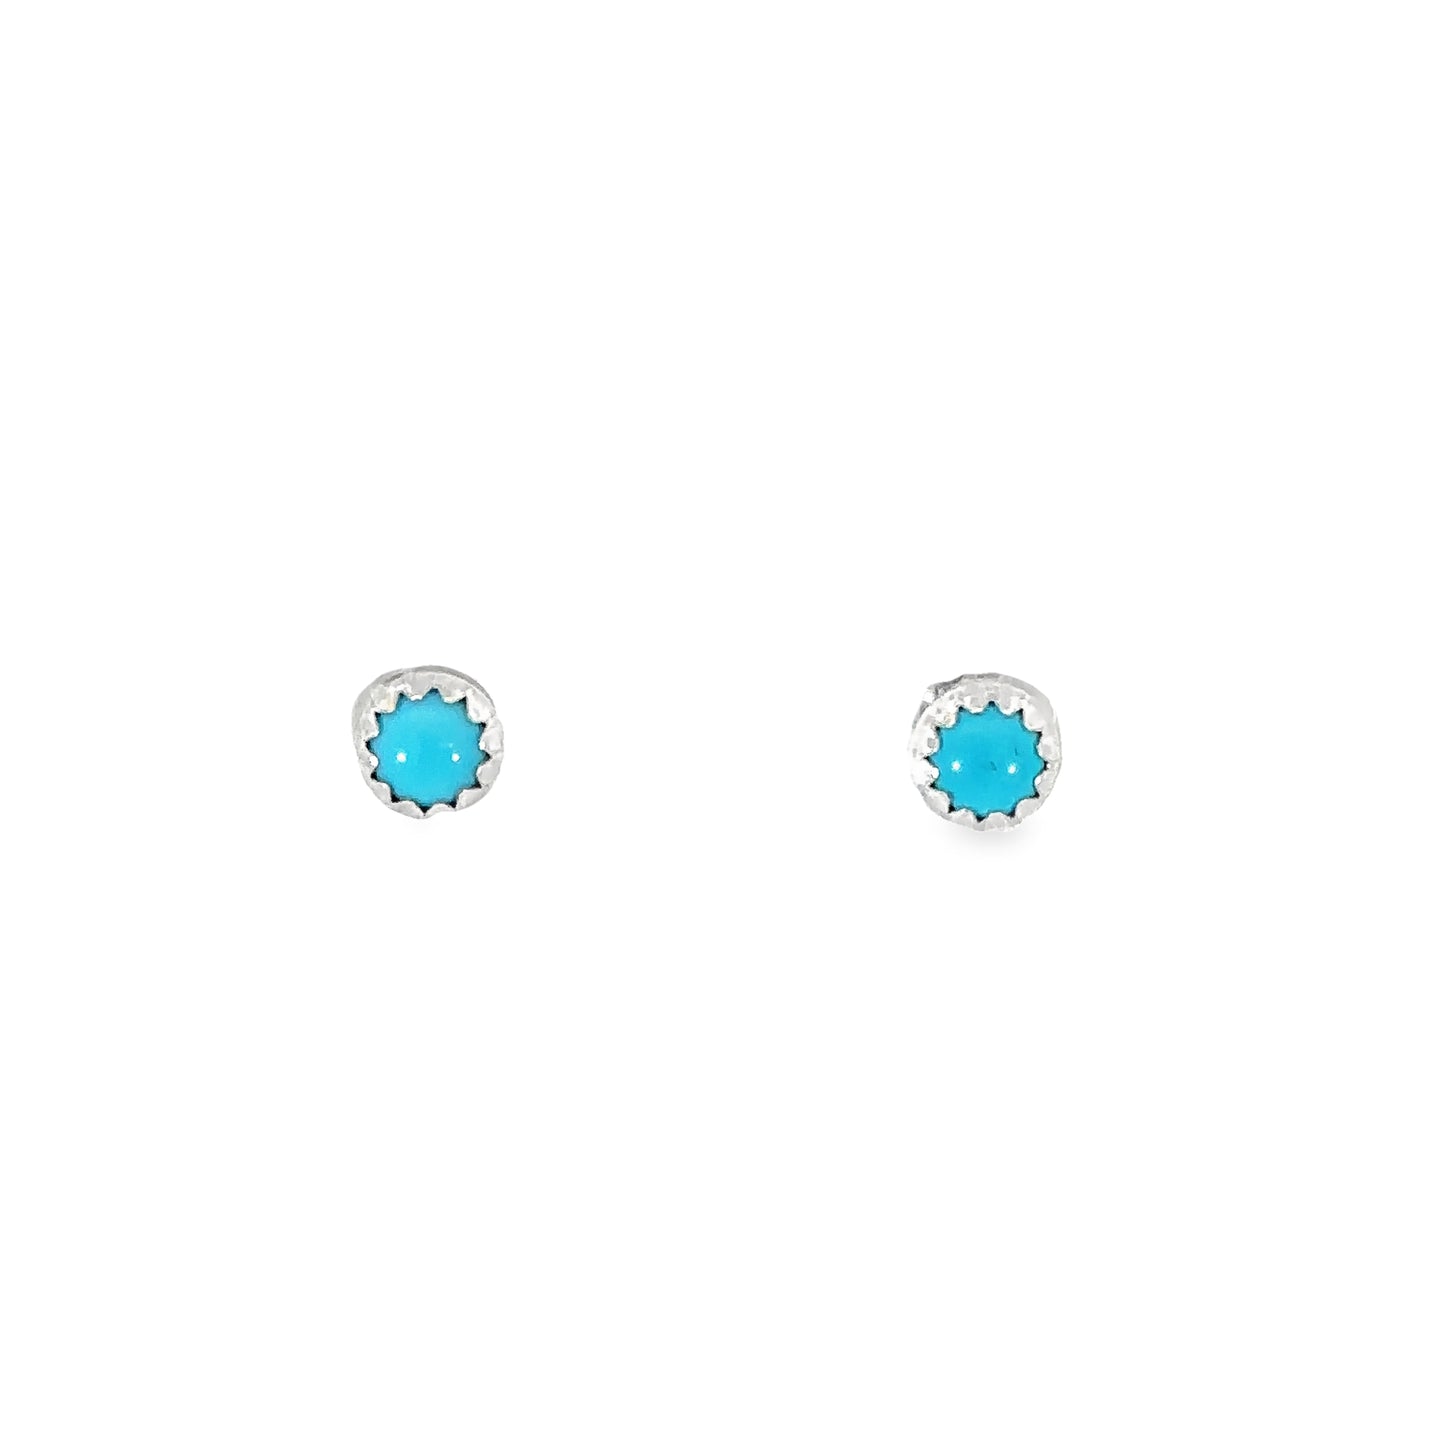 A pair of Circular Turquoise Studs on a white background.